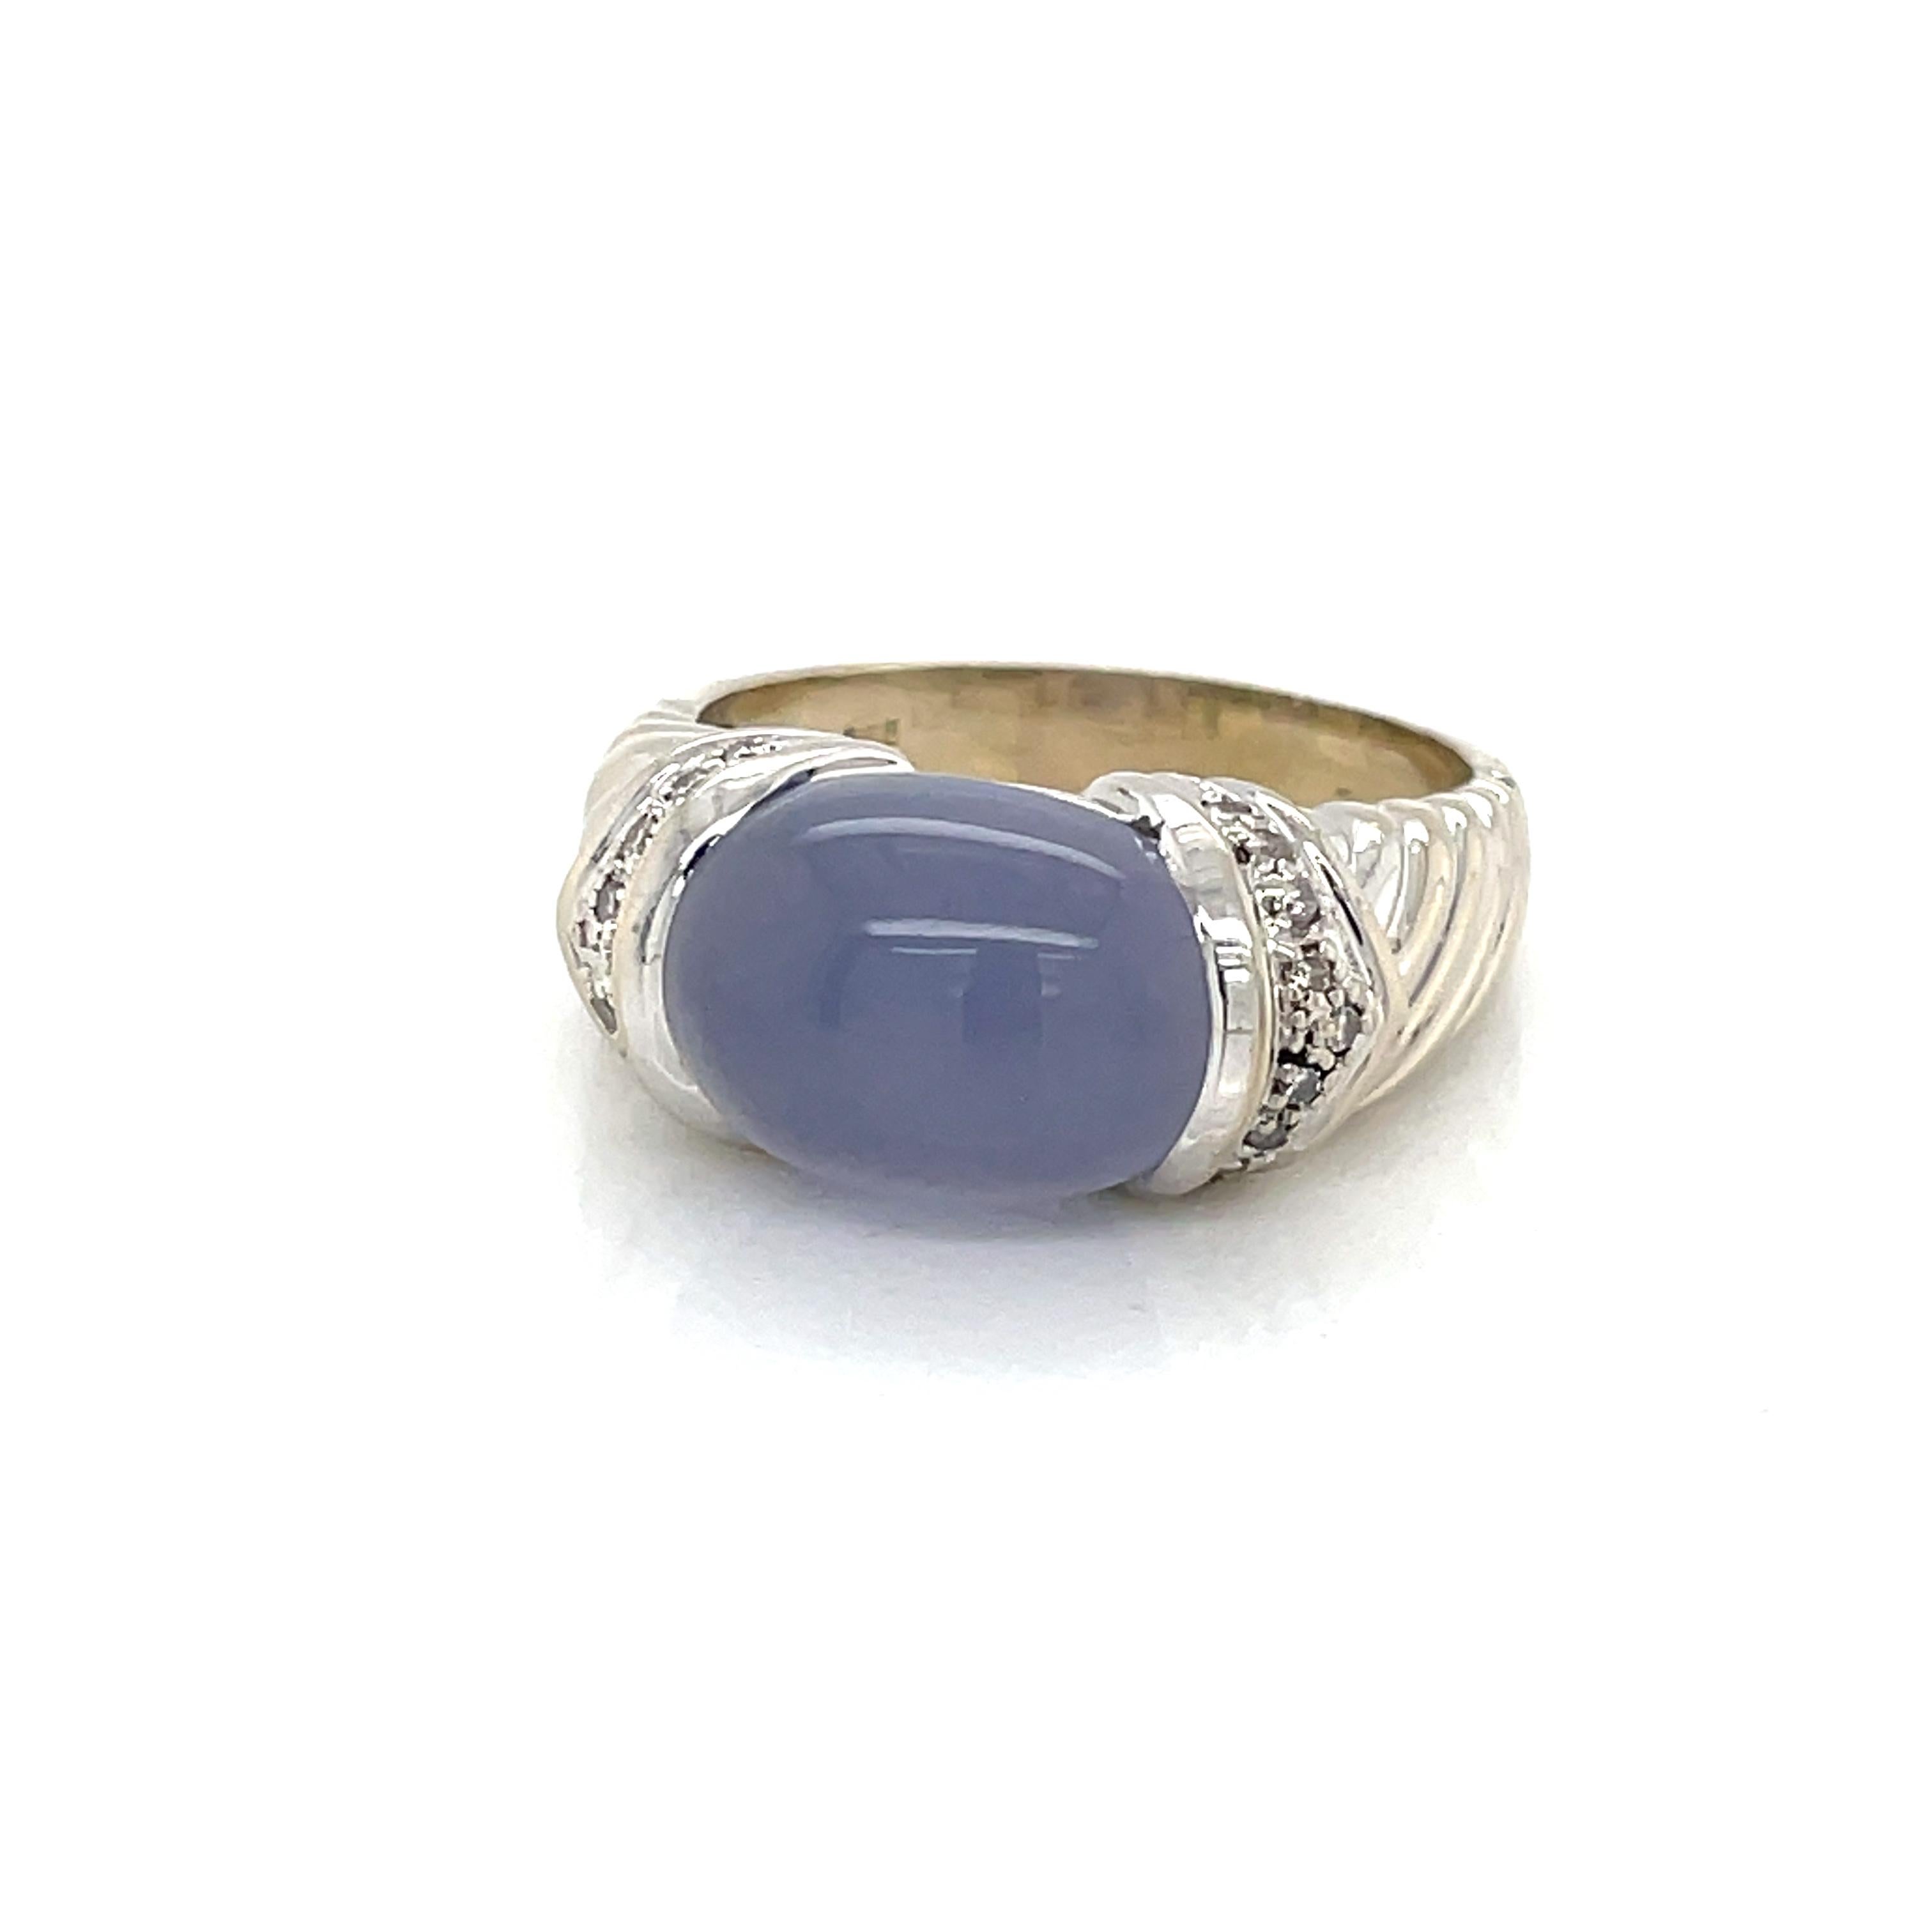 Cabochon Violet Chalcedony 14 Karat White Gold Ring W Diamond Accents